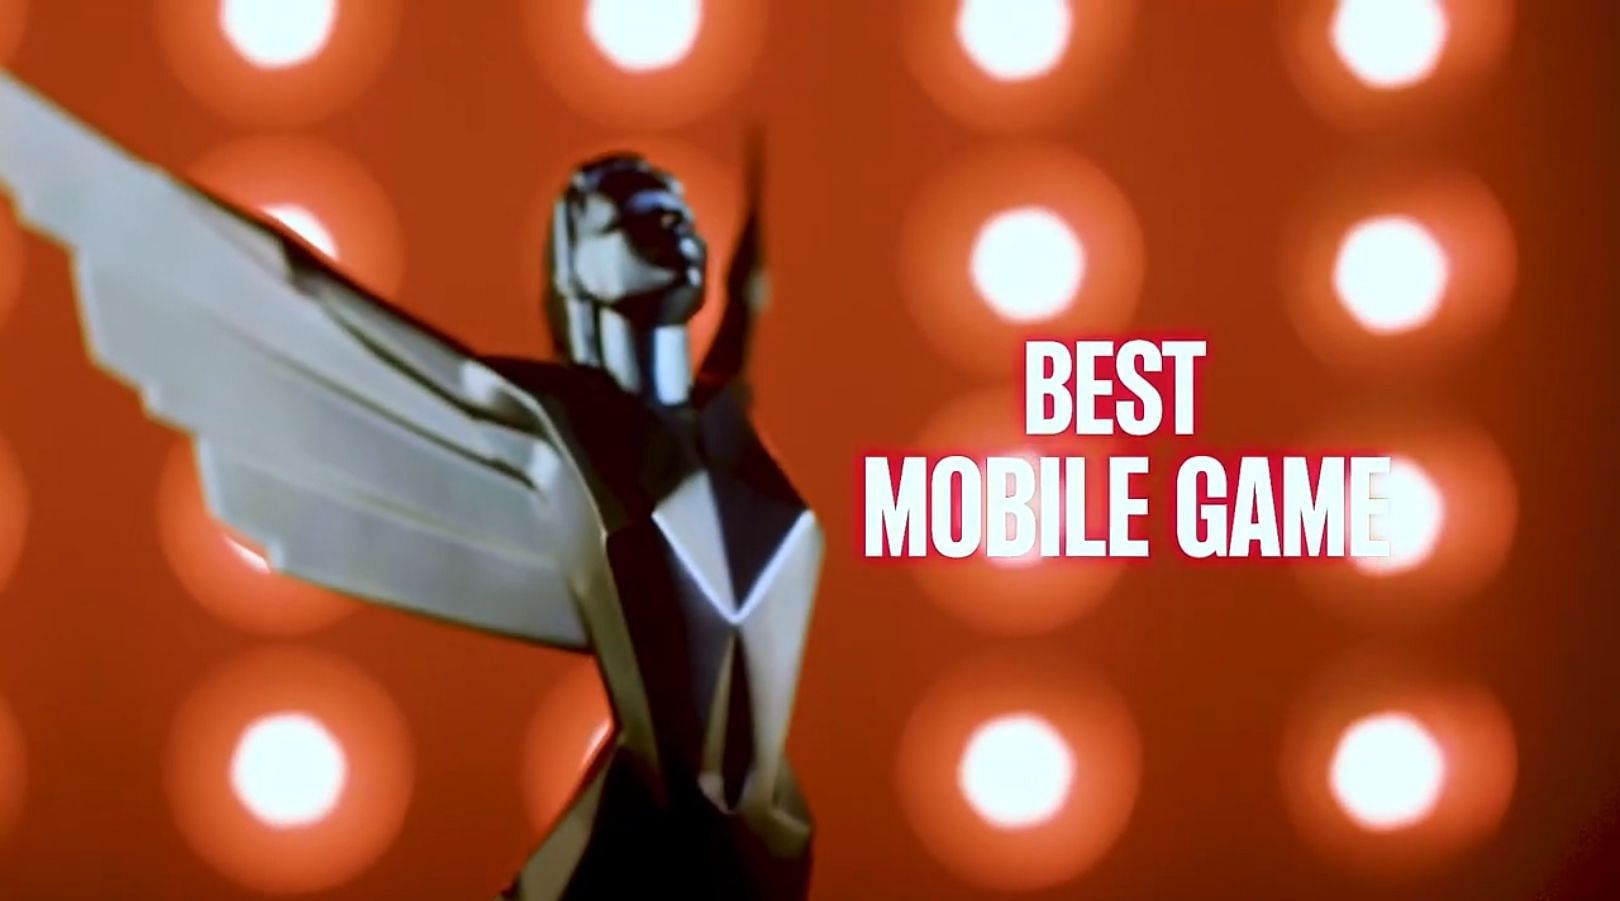 Five games have been nominated for Best Mobile Game (Image via The Game Awards 2022)